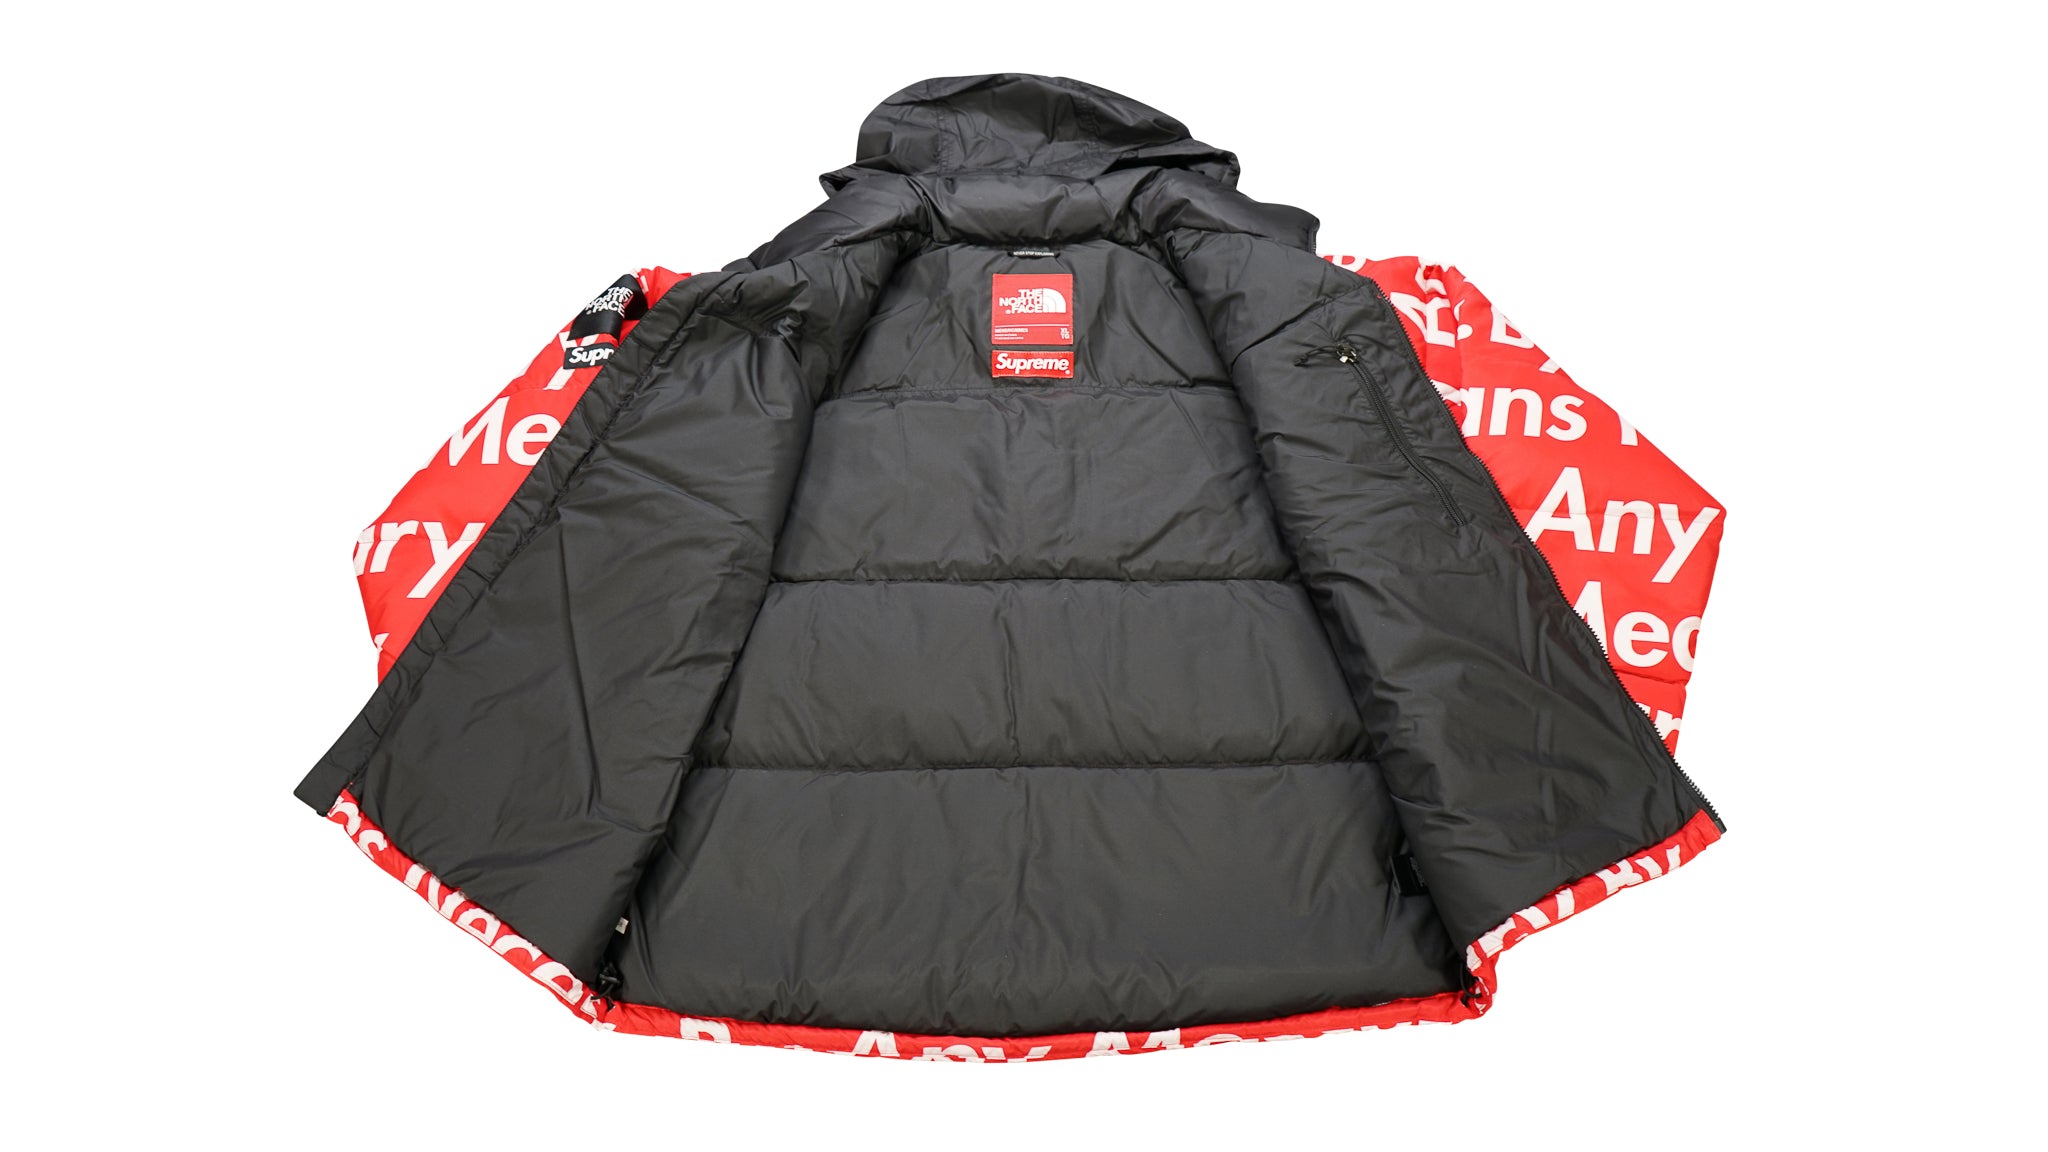 Supreme x north face by any means necessary | designer